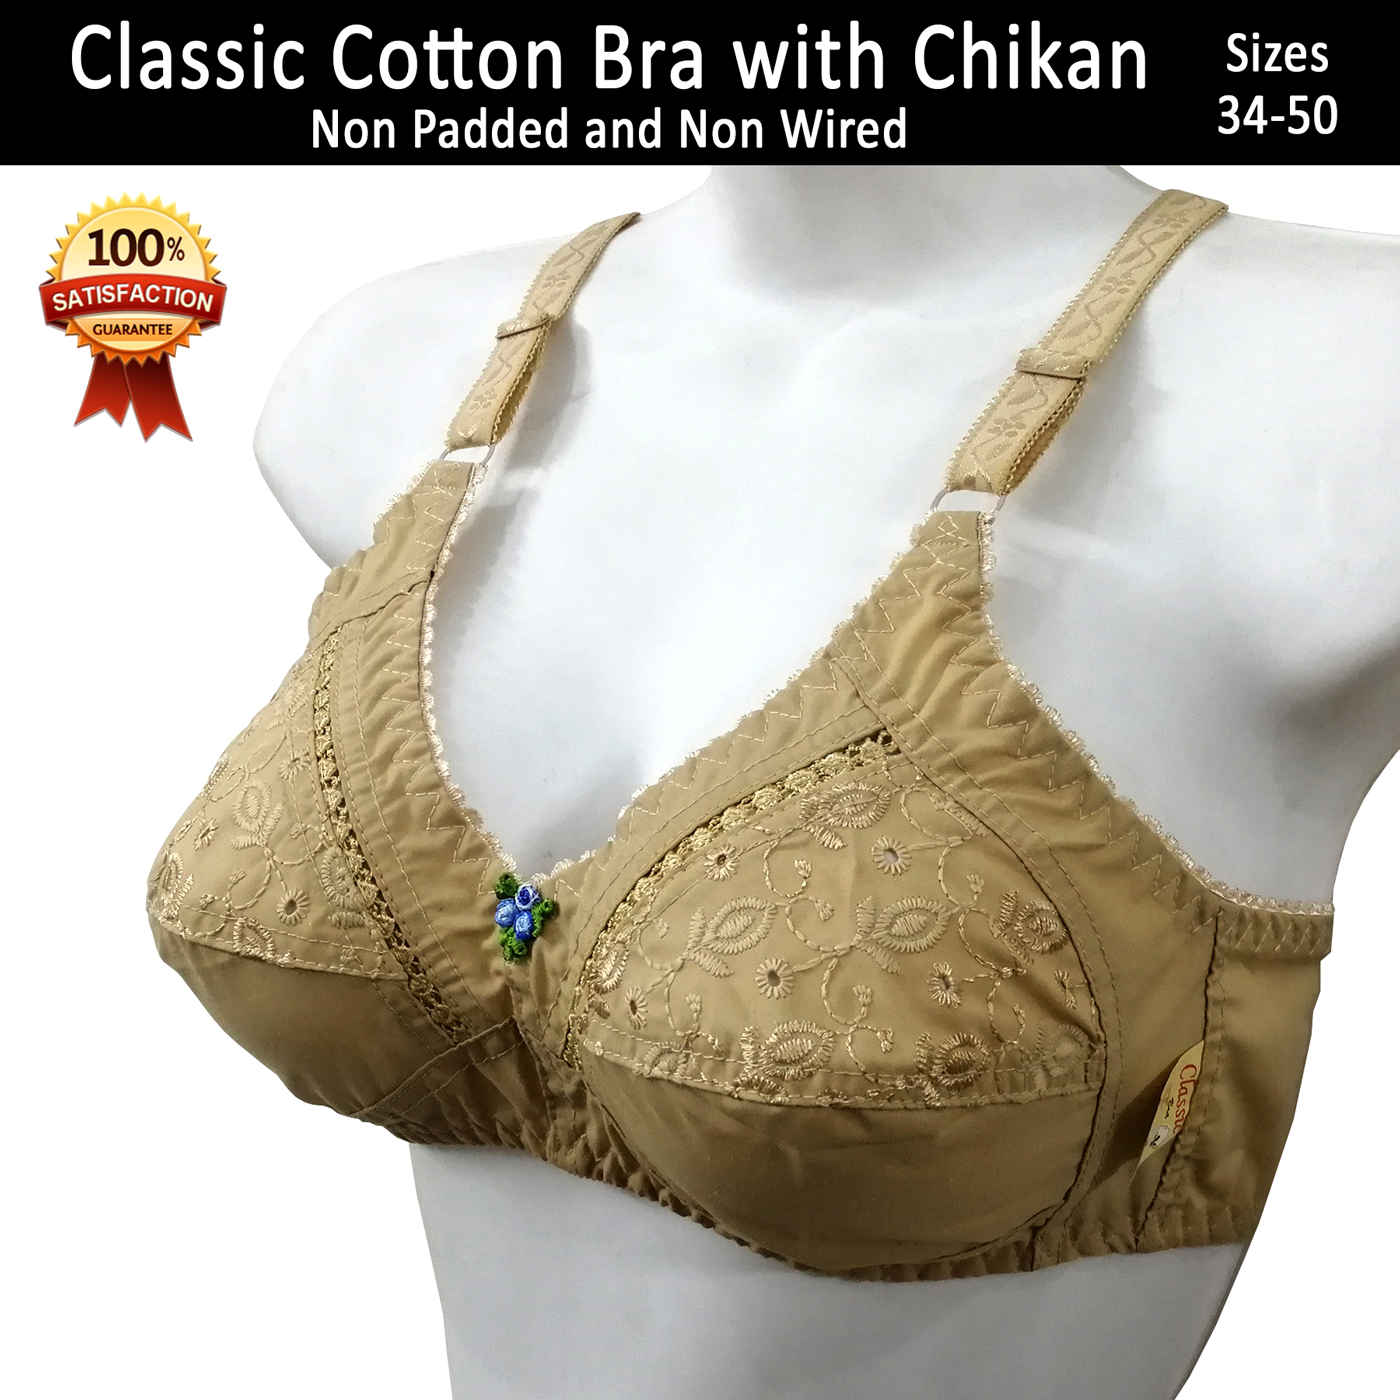 Classic Cotton Bras for Women Non Padded Bra for Ladies Non Wired